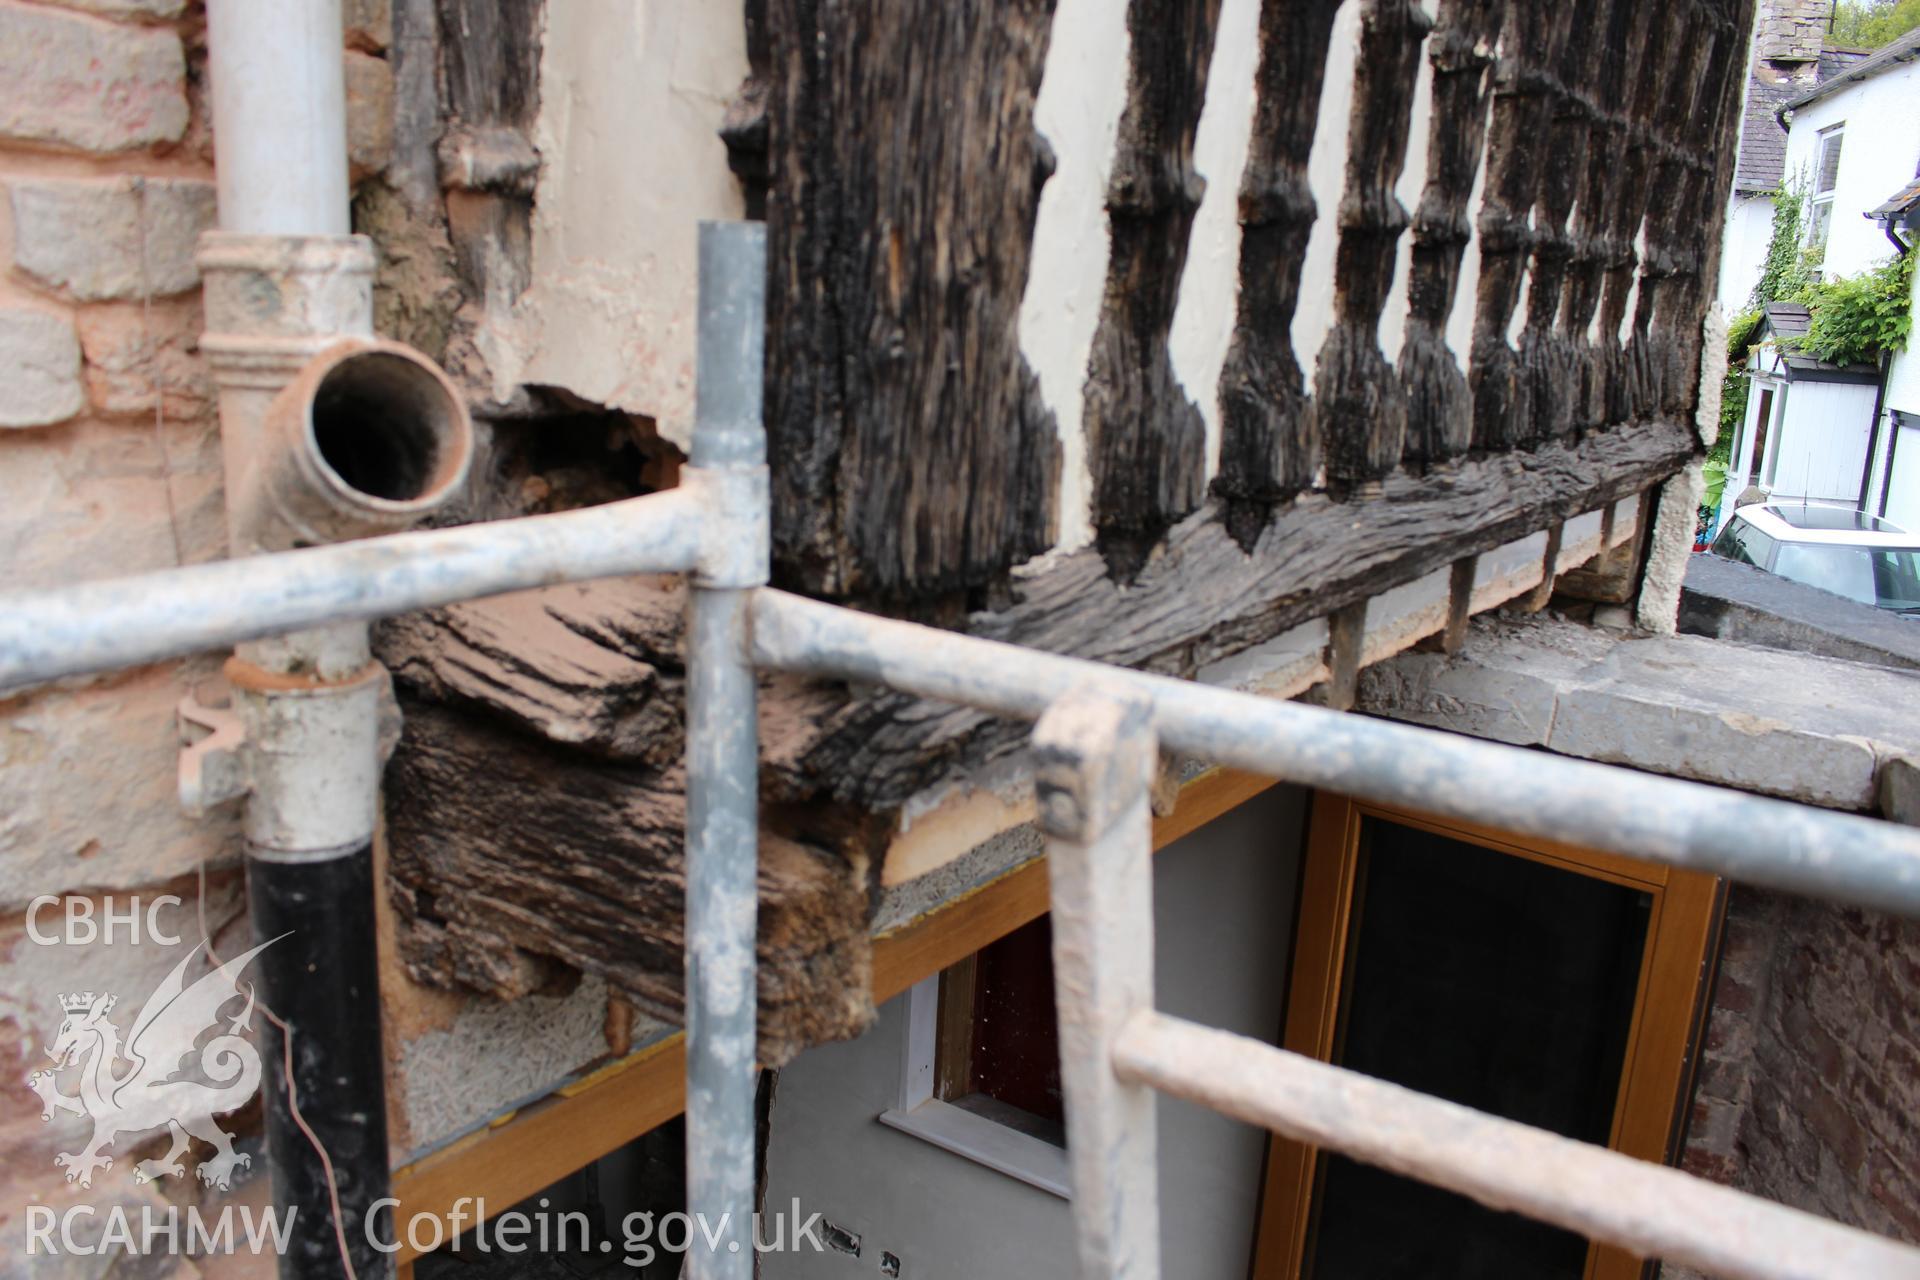 Colour photograph showing detailed view of section of 17th century balcony ballustrading embedded in southeast corner of Porth y Dwr, Clwyd Street, Ruthin. Photograph taken during survey conducted by Geoff Ward on 9th October 2014.